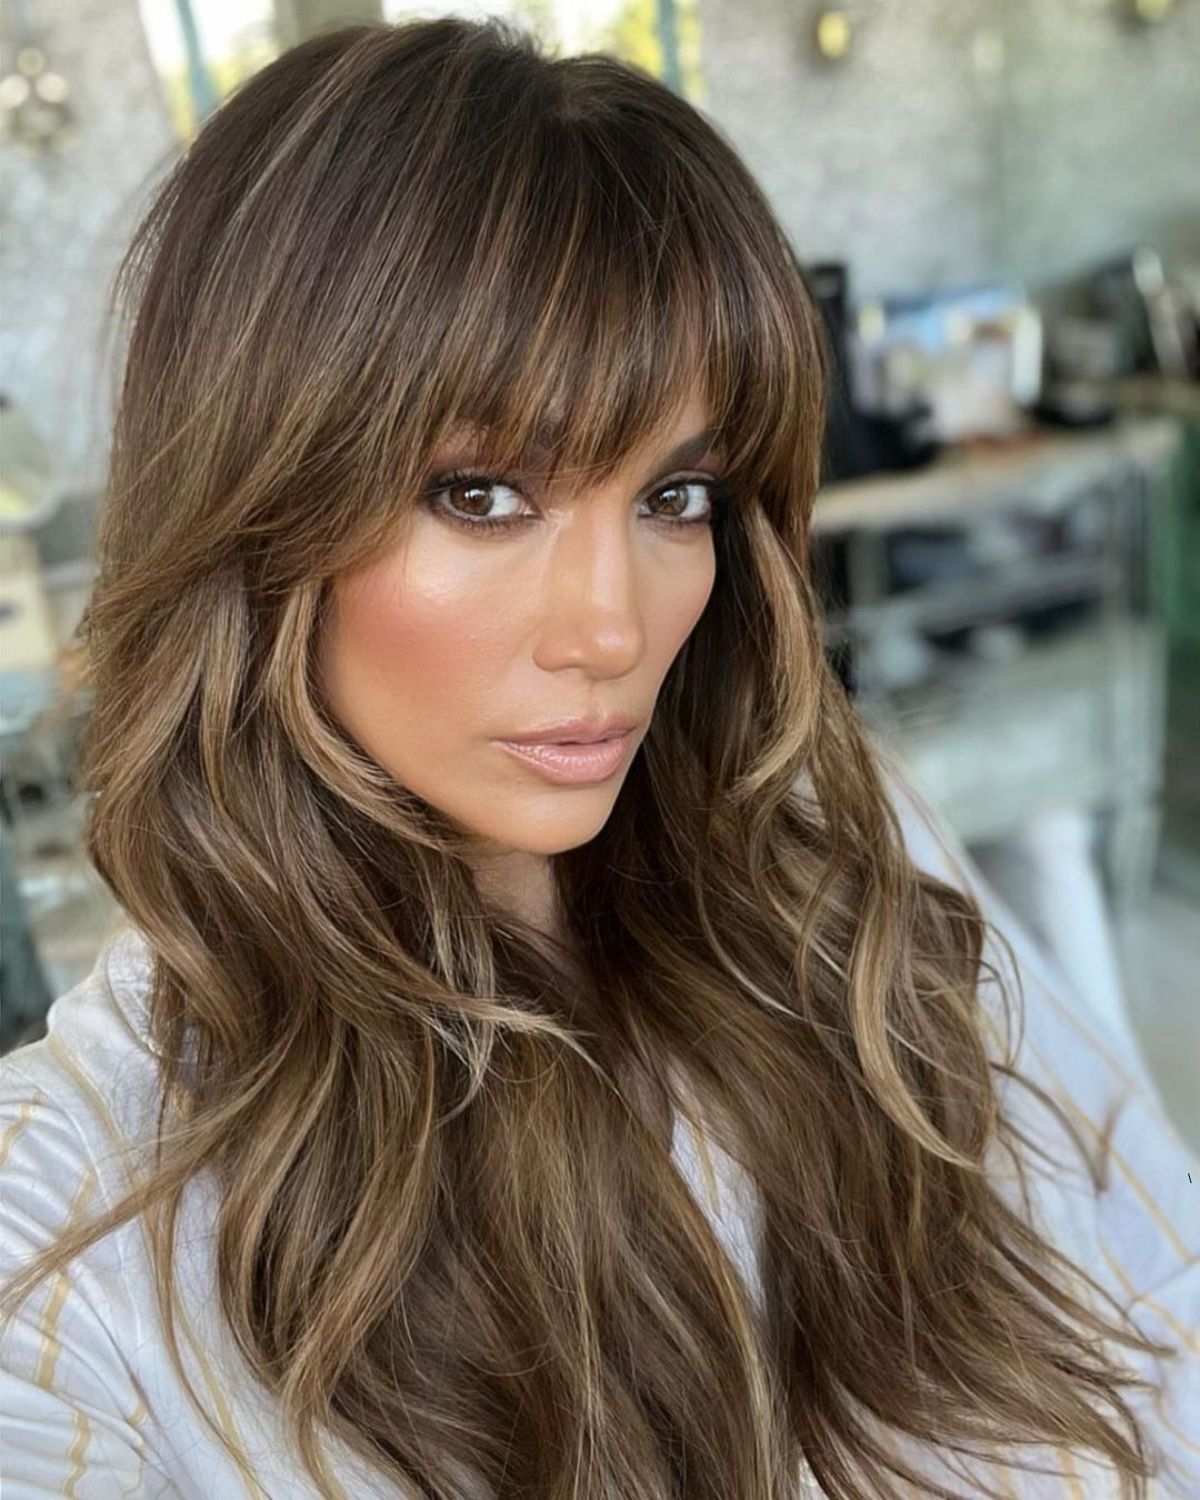 Jennifer Lopez taking a picture with new hair